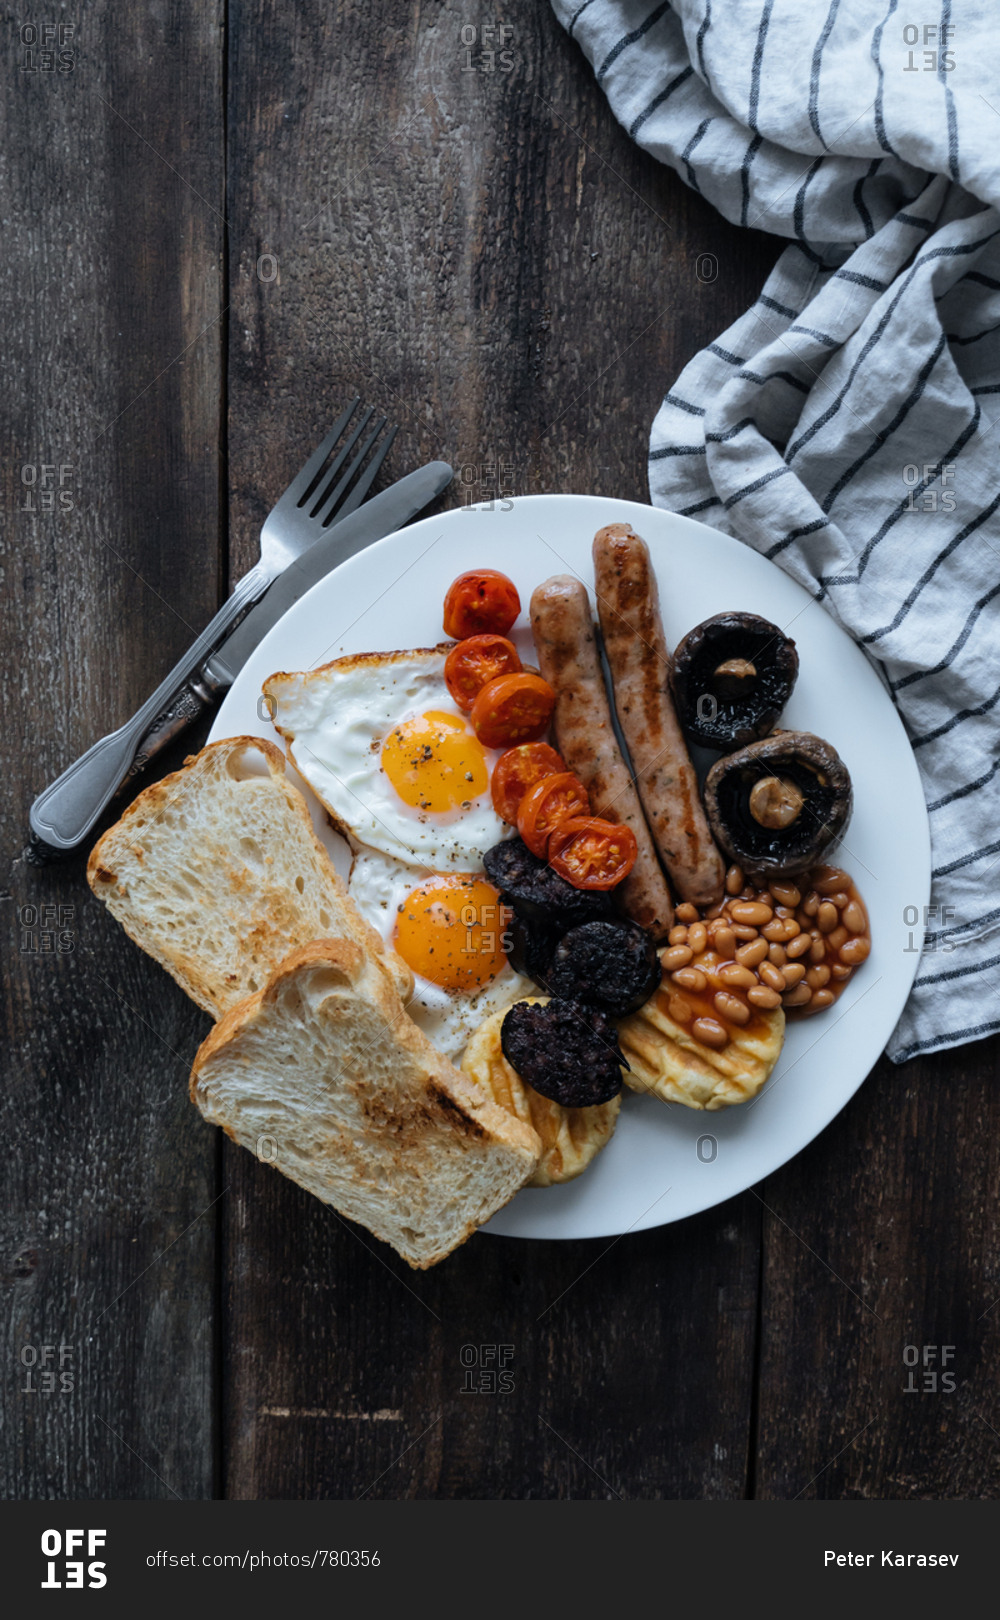 Plate of full traditional English breakfast